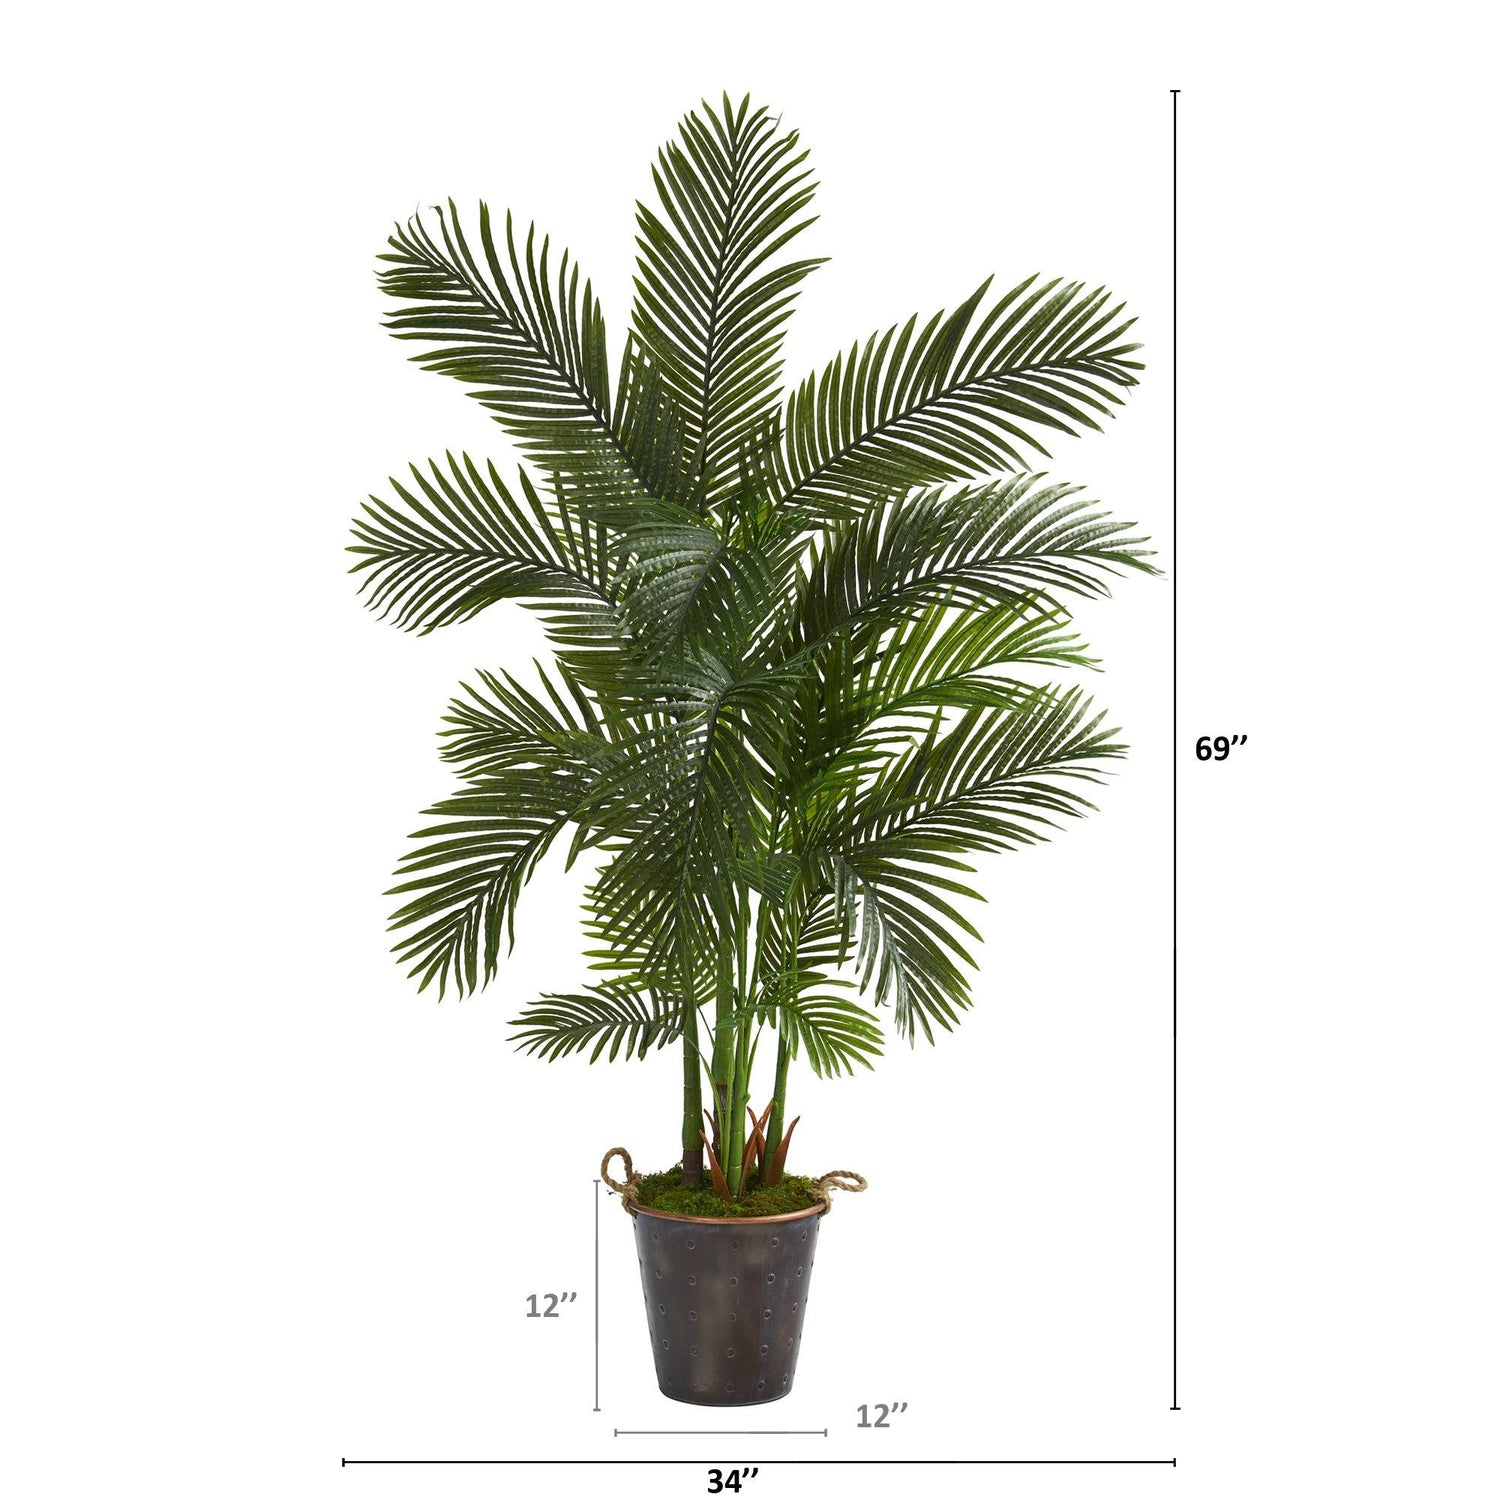 69” Areca Palm Artificial Tree in Decorative Metal Pail with Rope